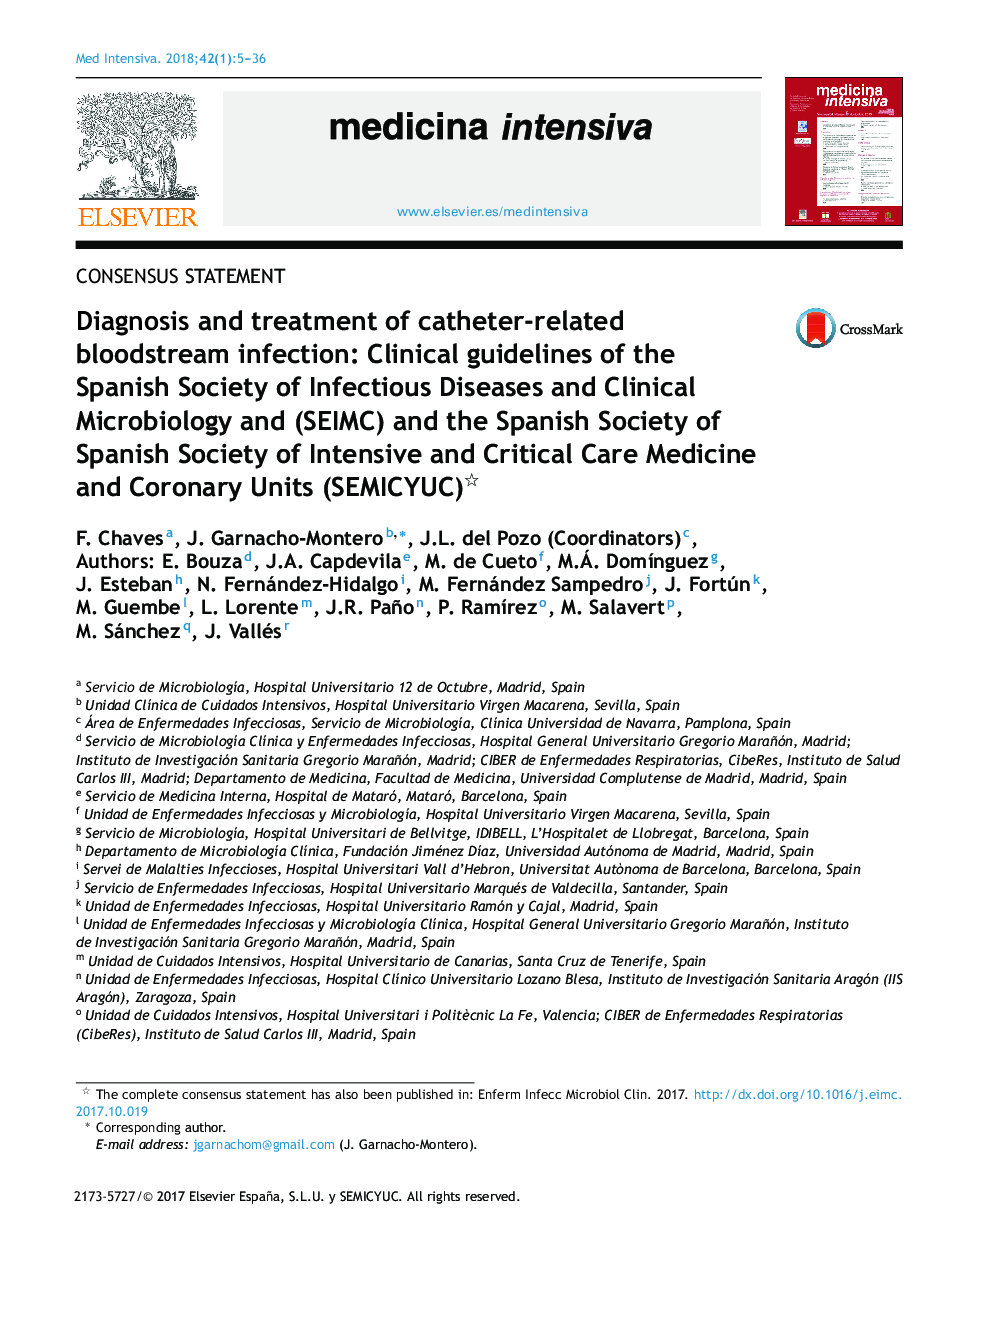 Diagnosis and treatment of catheter-related bloodstream infection: Clinical guidelines of the Spanish Society of Infectious Diseases and Clinical Microbiology and (SEIMC) and the Spanish Society of Spanish Society of Intensive and Critical Care Medicine a